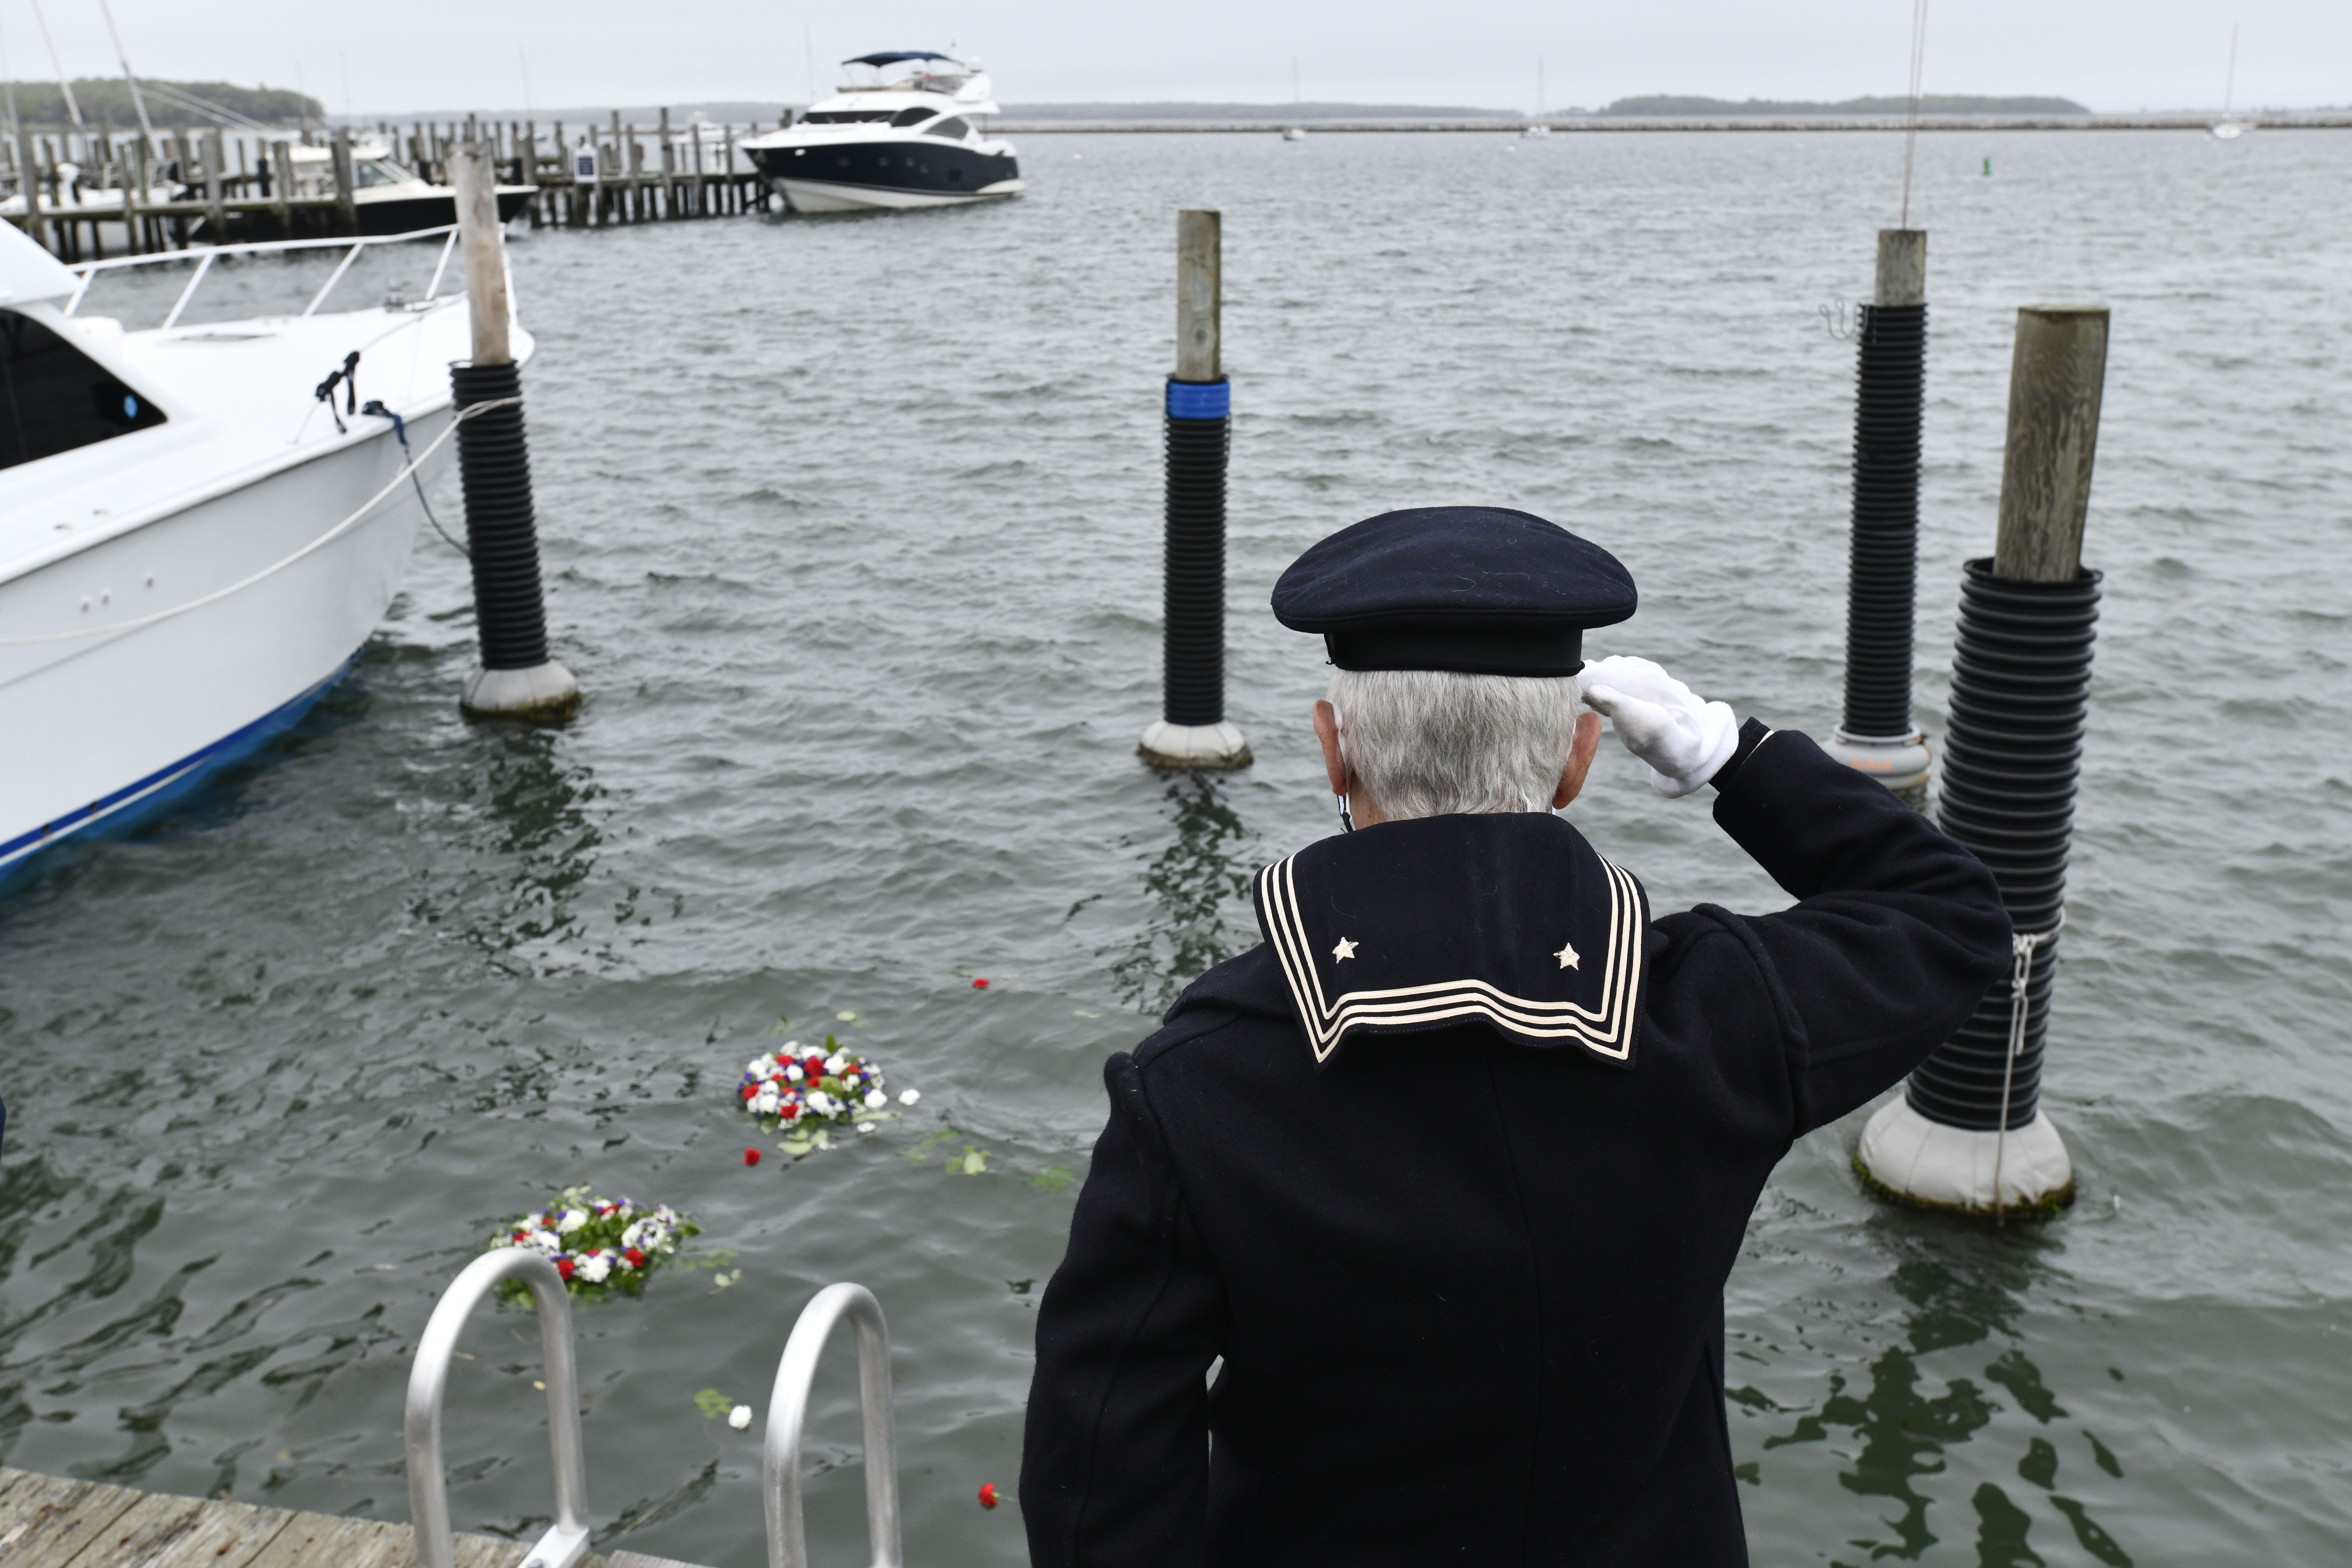 John Capello salutes during Memorial Day observances in Sag Harbor on Monday.